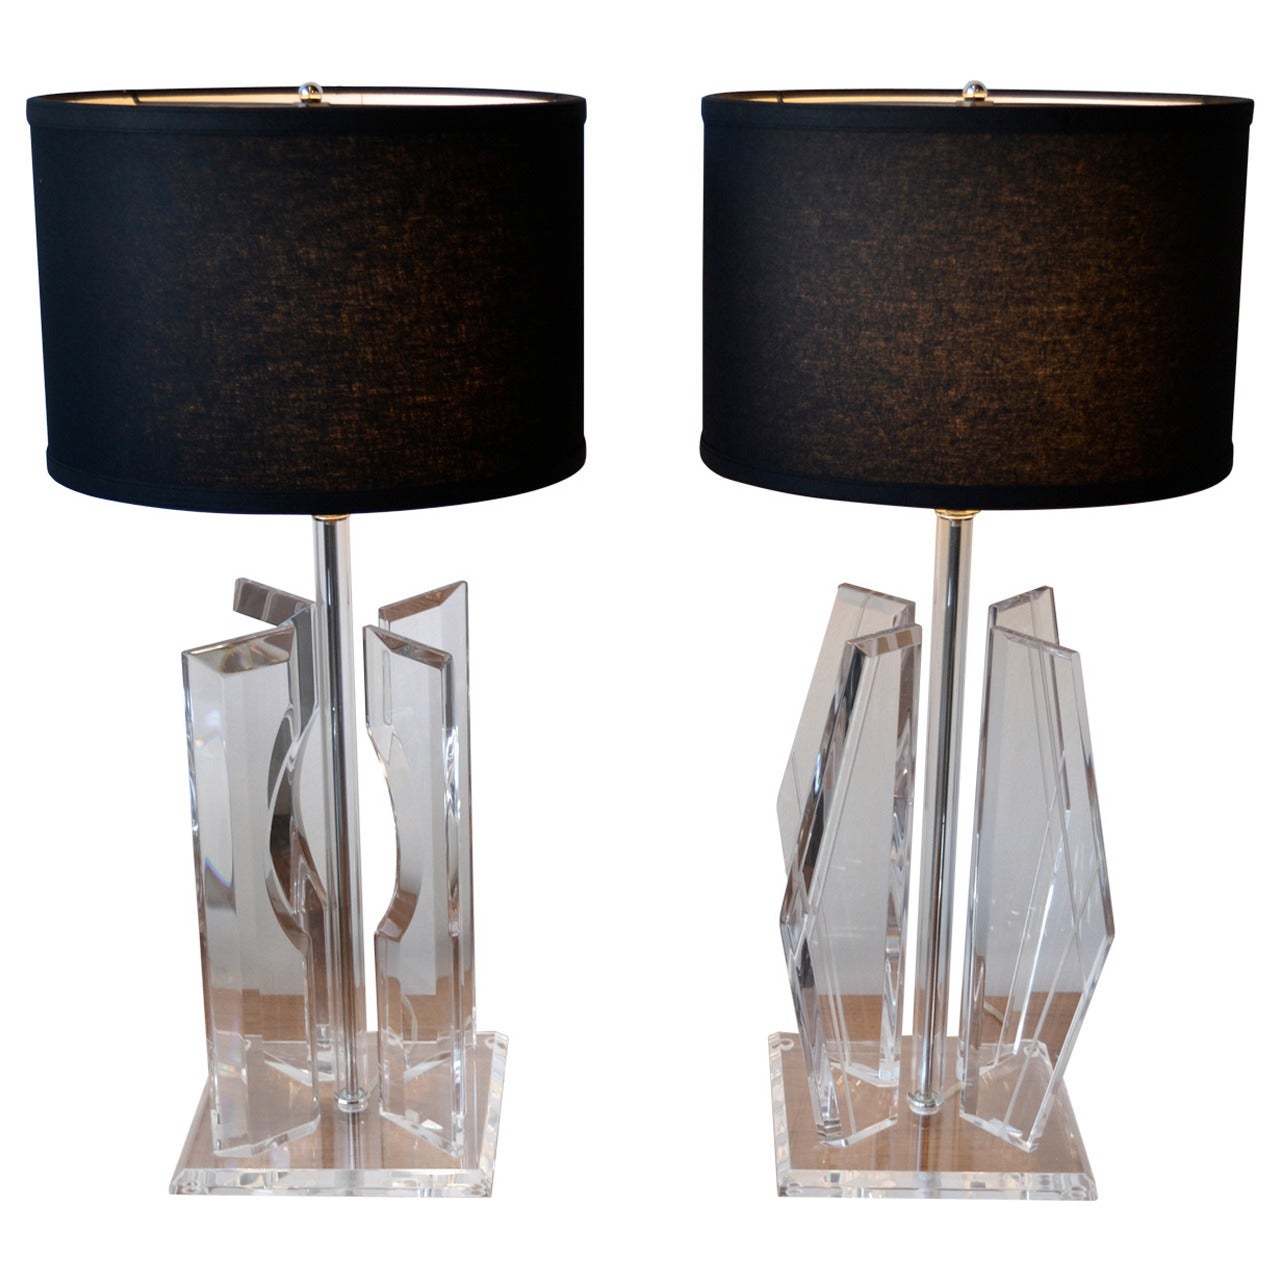 Pair of Mid Century Modern Sculptural Lucite and Chrome Table Lamps, 1970's For Sale